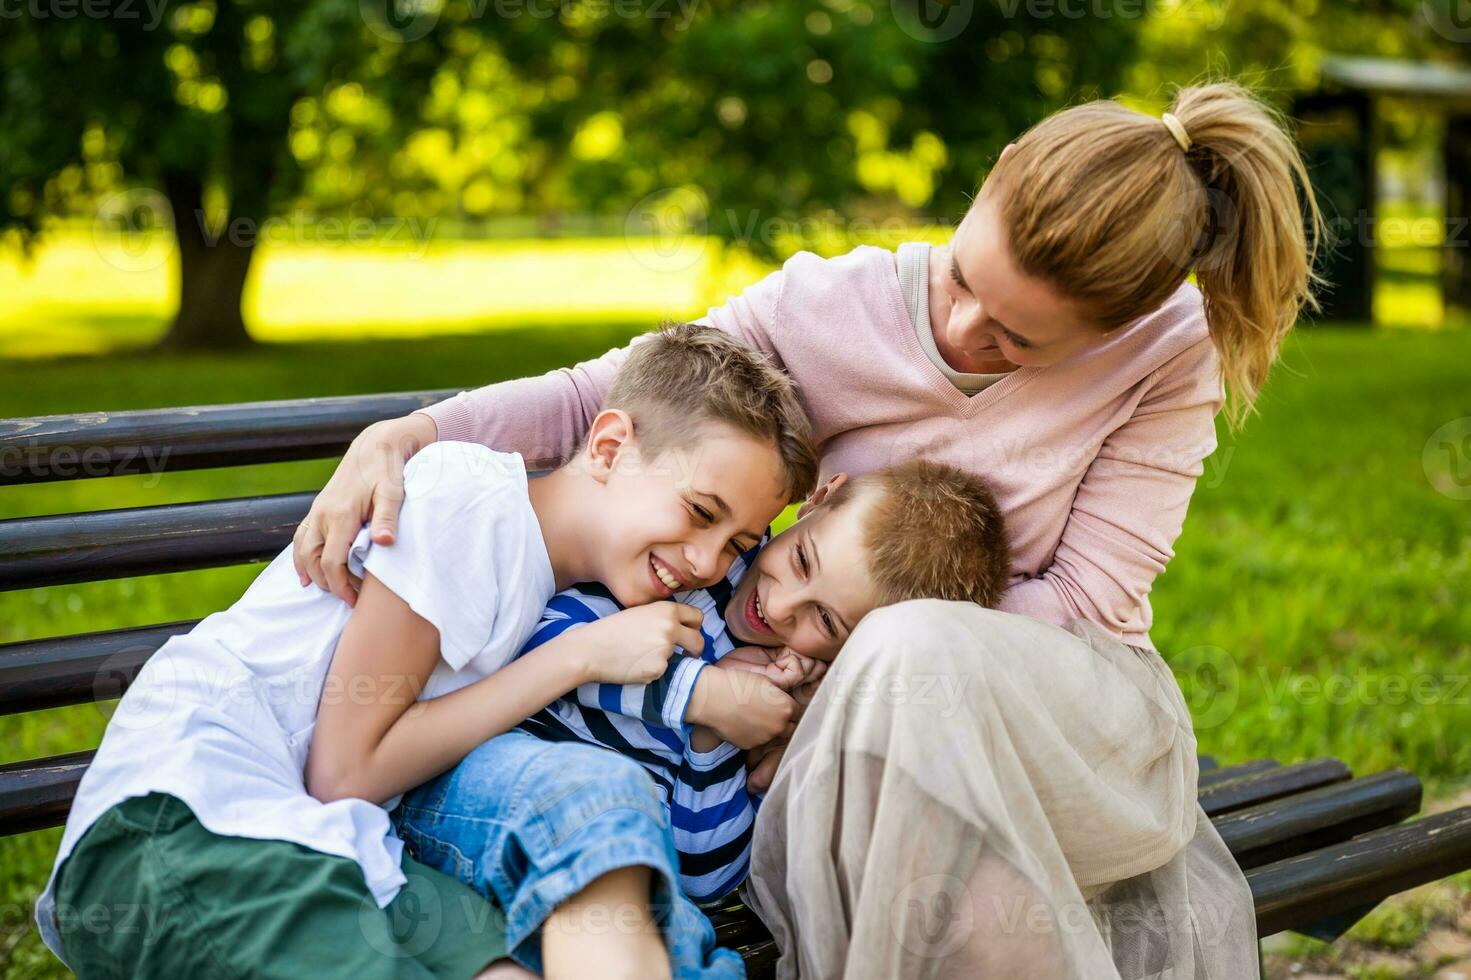 Happy mother is sitting with her sons on bench in park. They are having fun together. photo